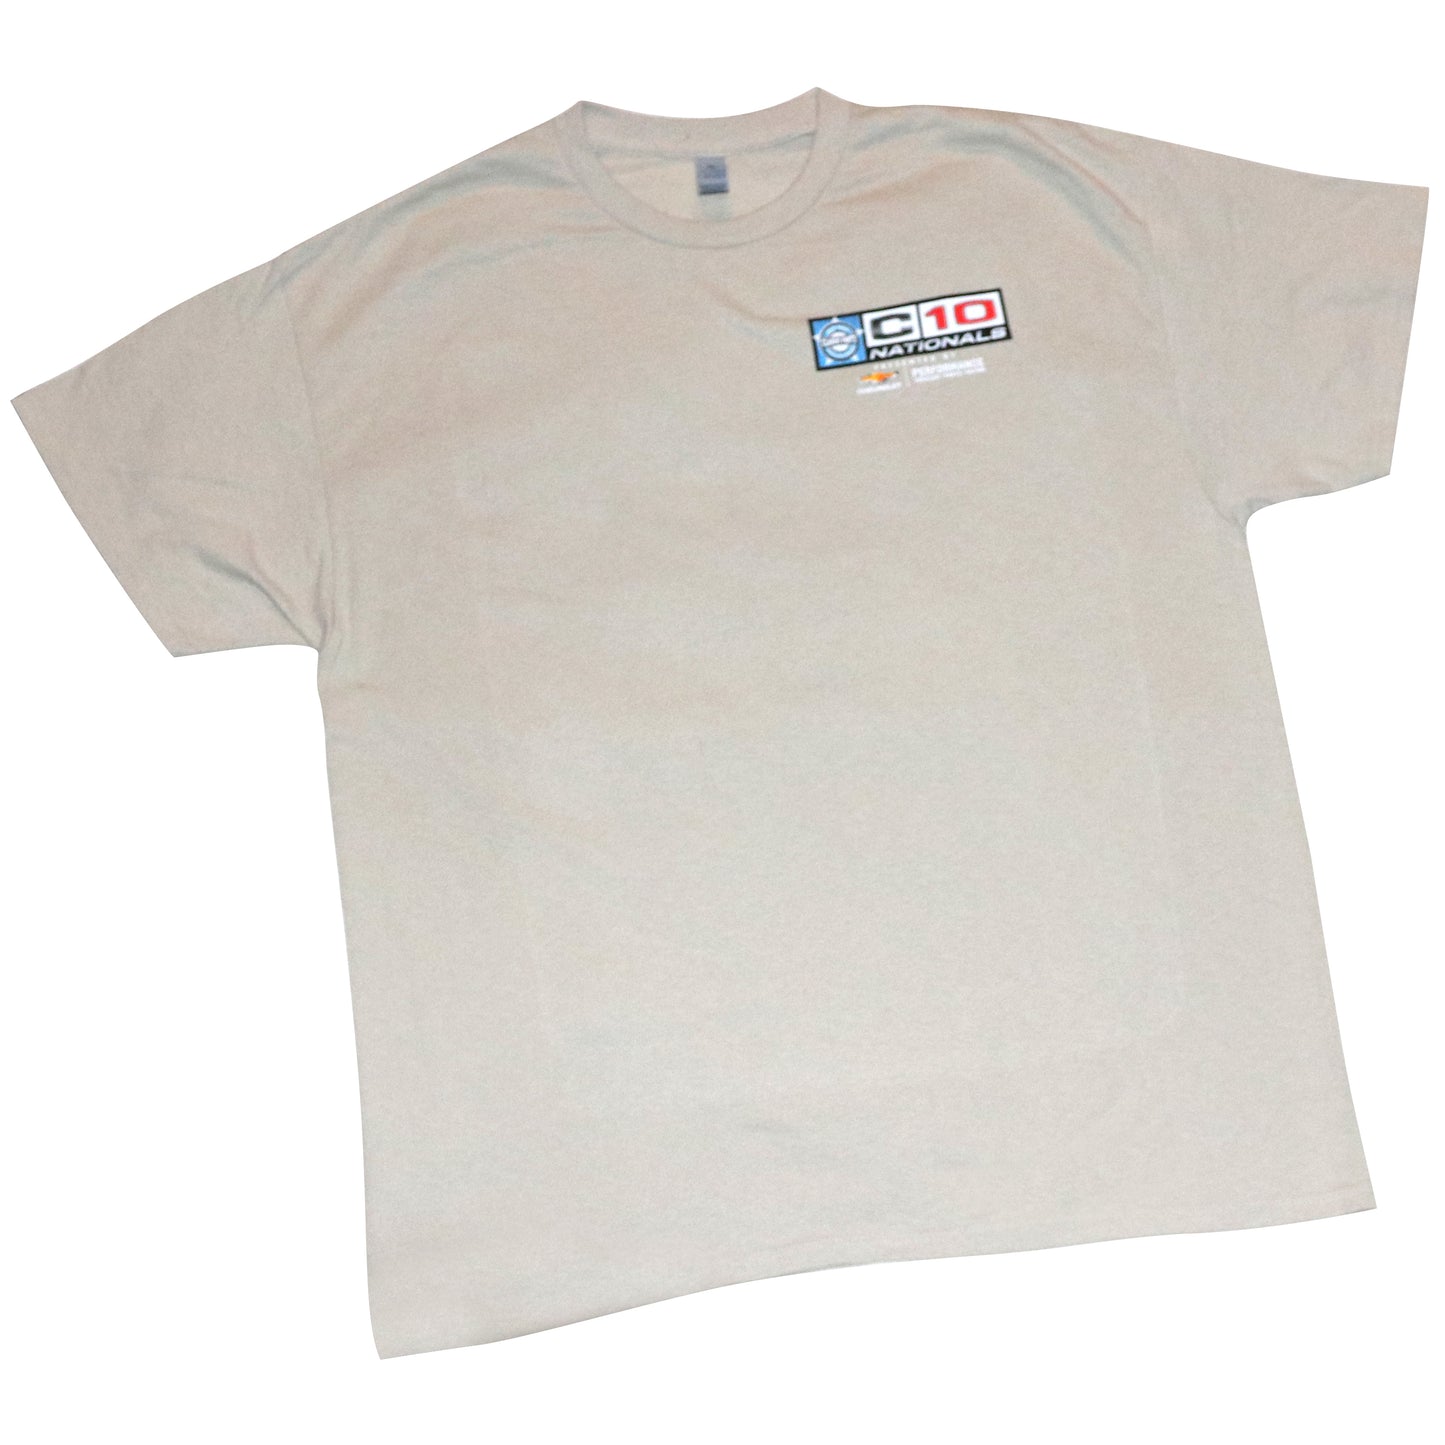 C10 Nationals® 1973-87 4WD Truck T-Shirts